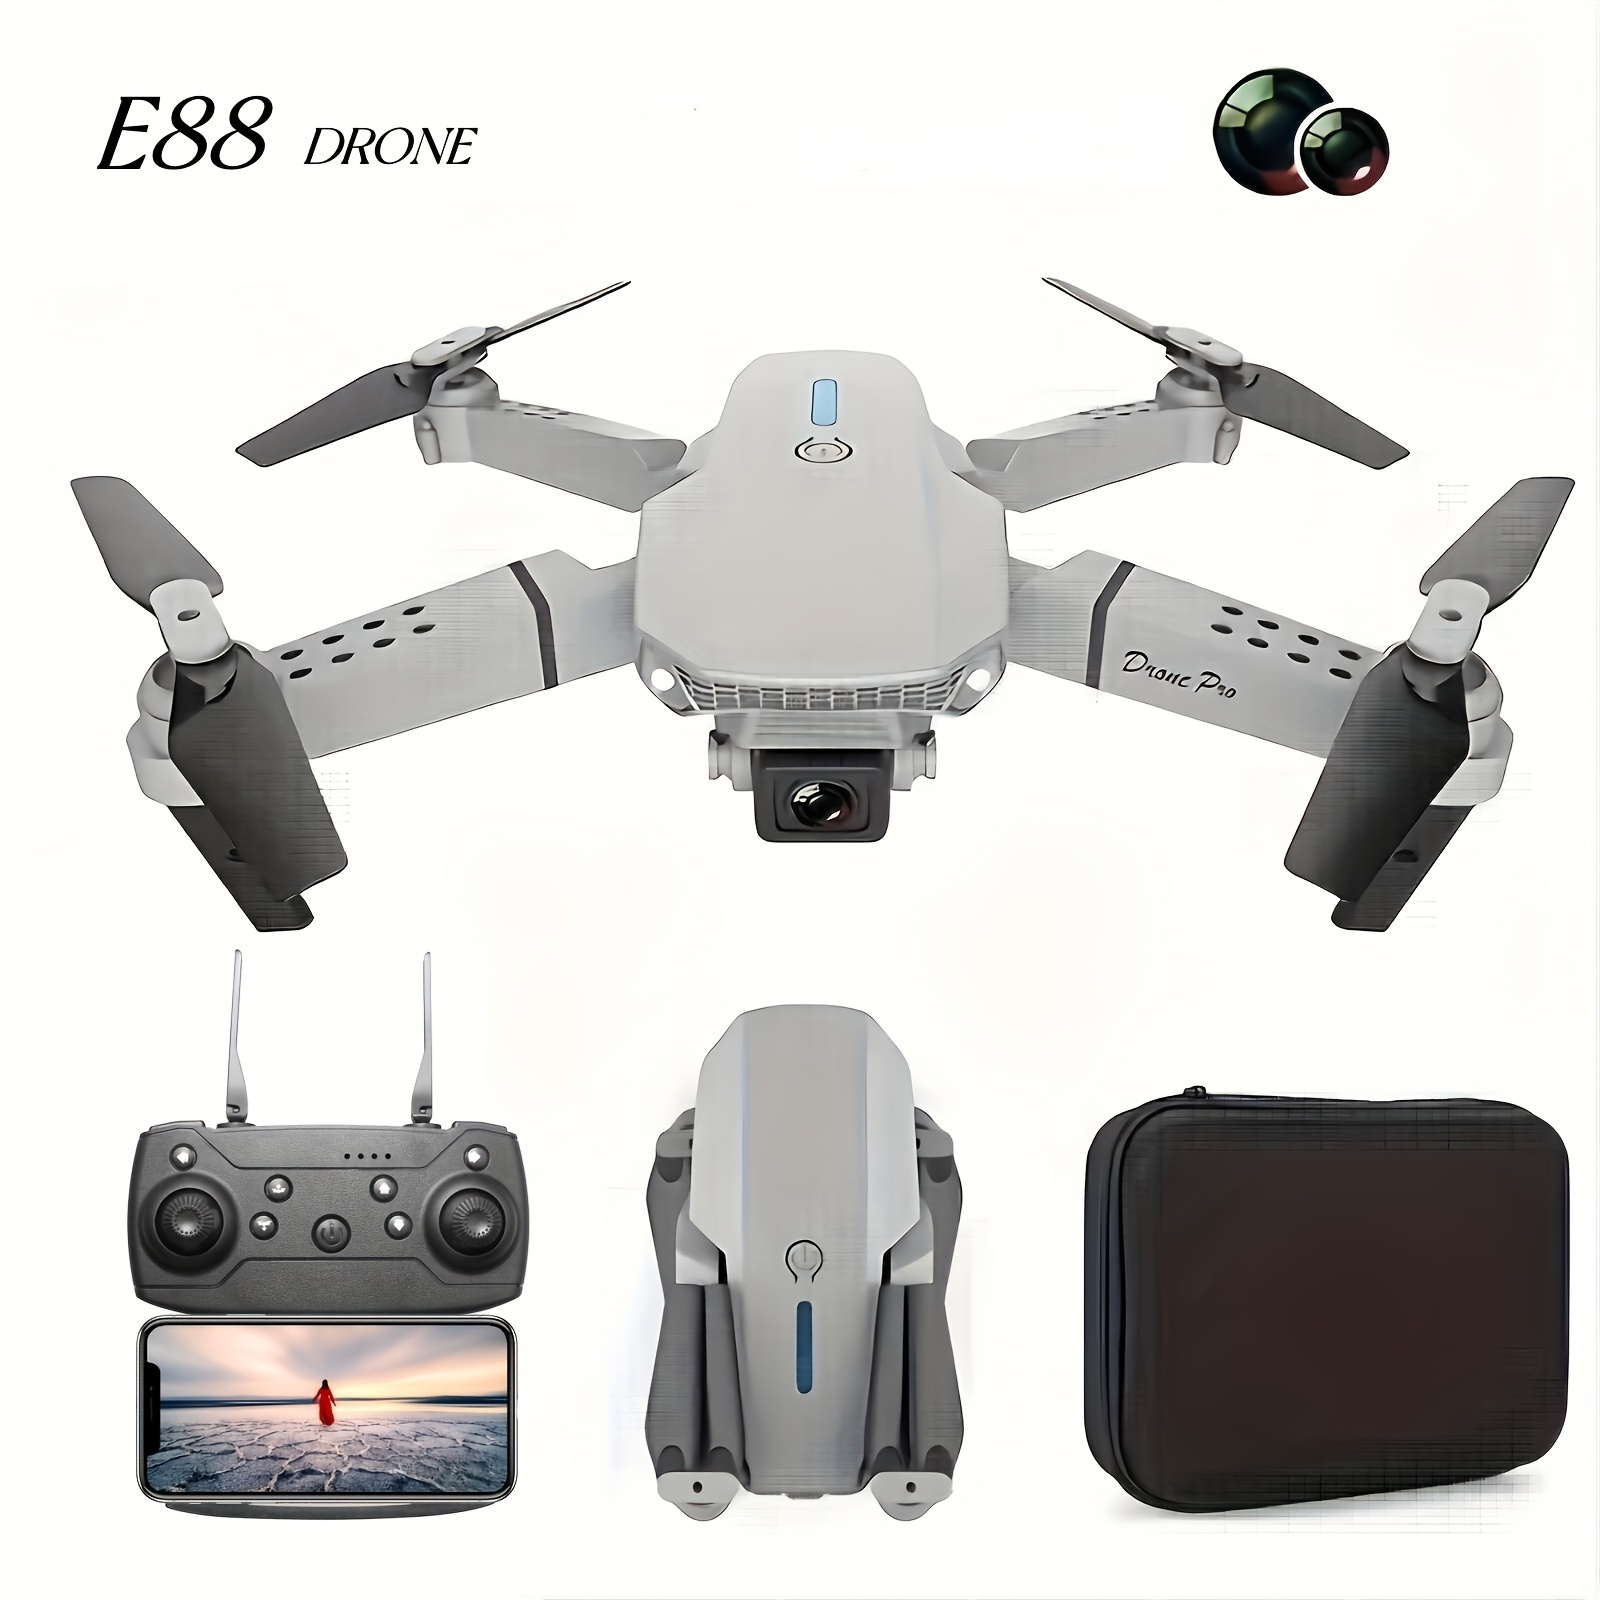 

E88 Drone Equipped With Dual Cameras, Mobile Application Control, Indoor Flying, Halloween/christmas/new Year Gifts